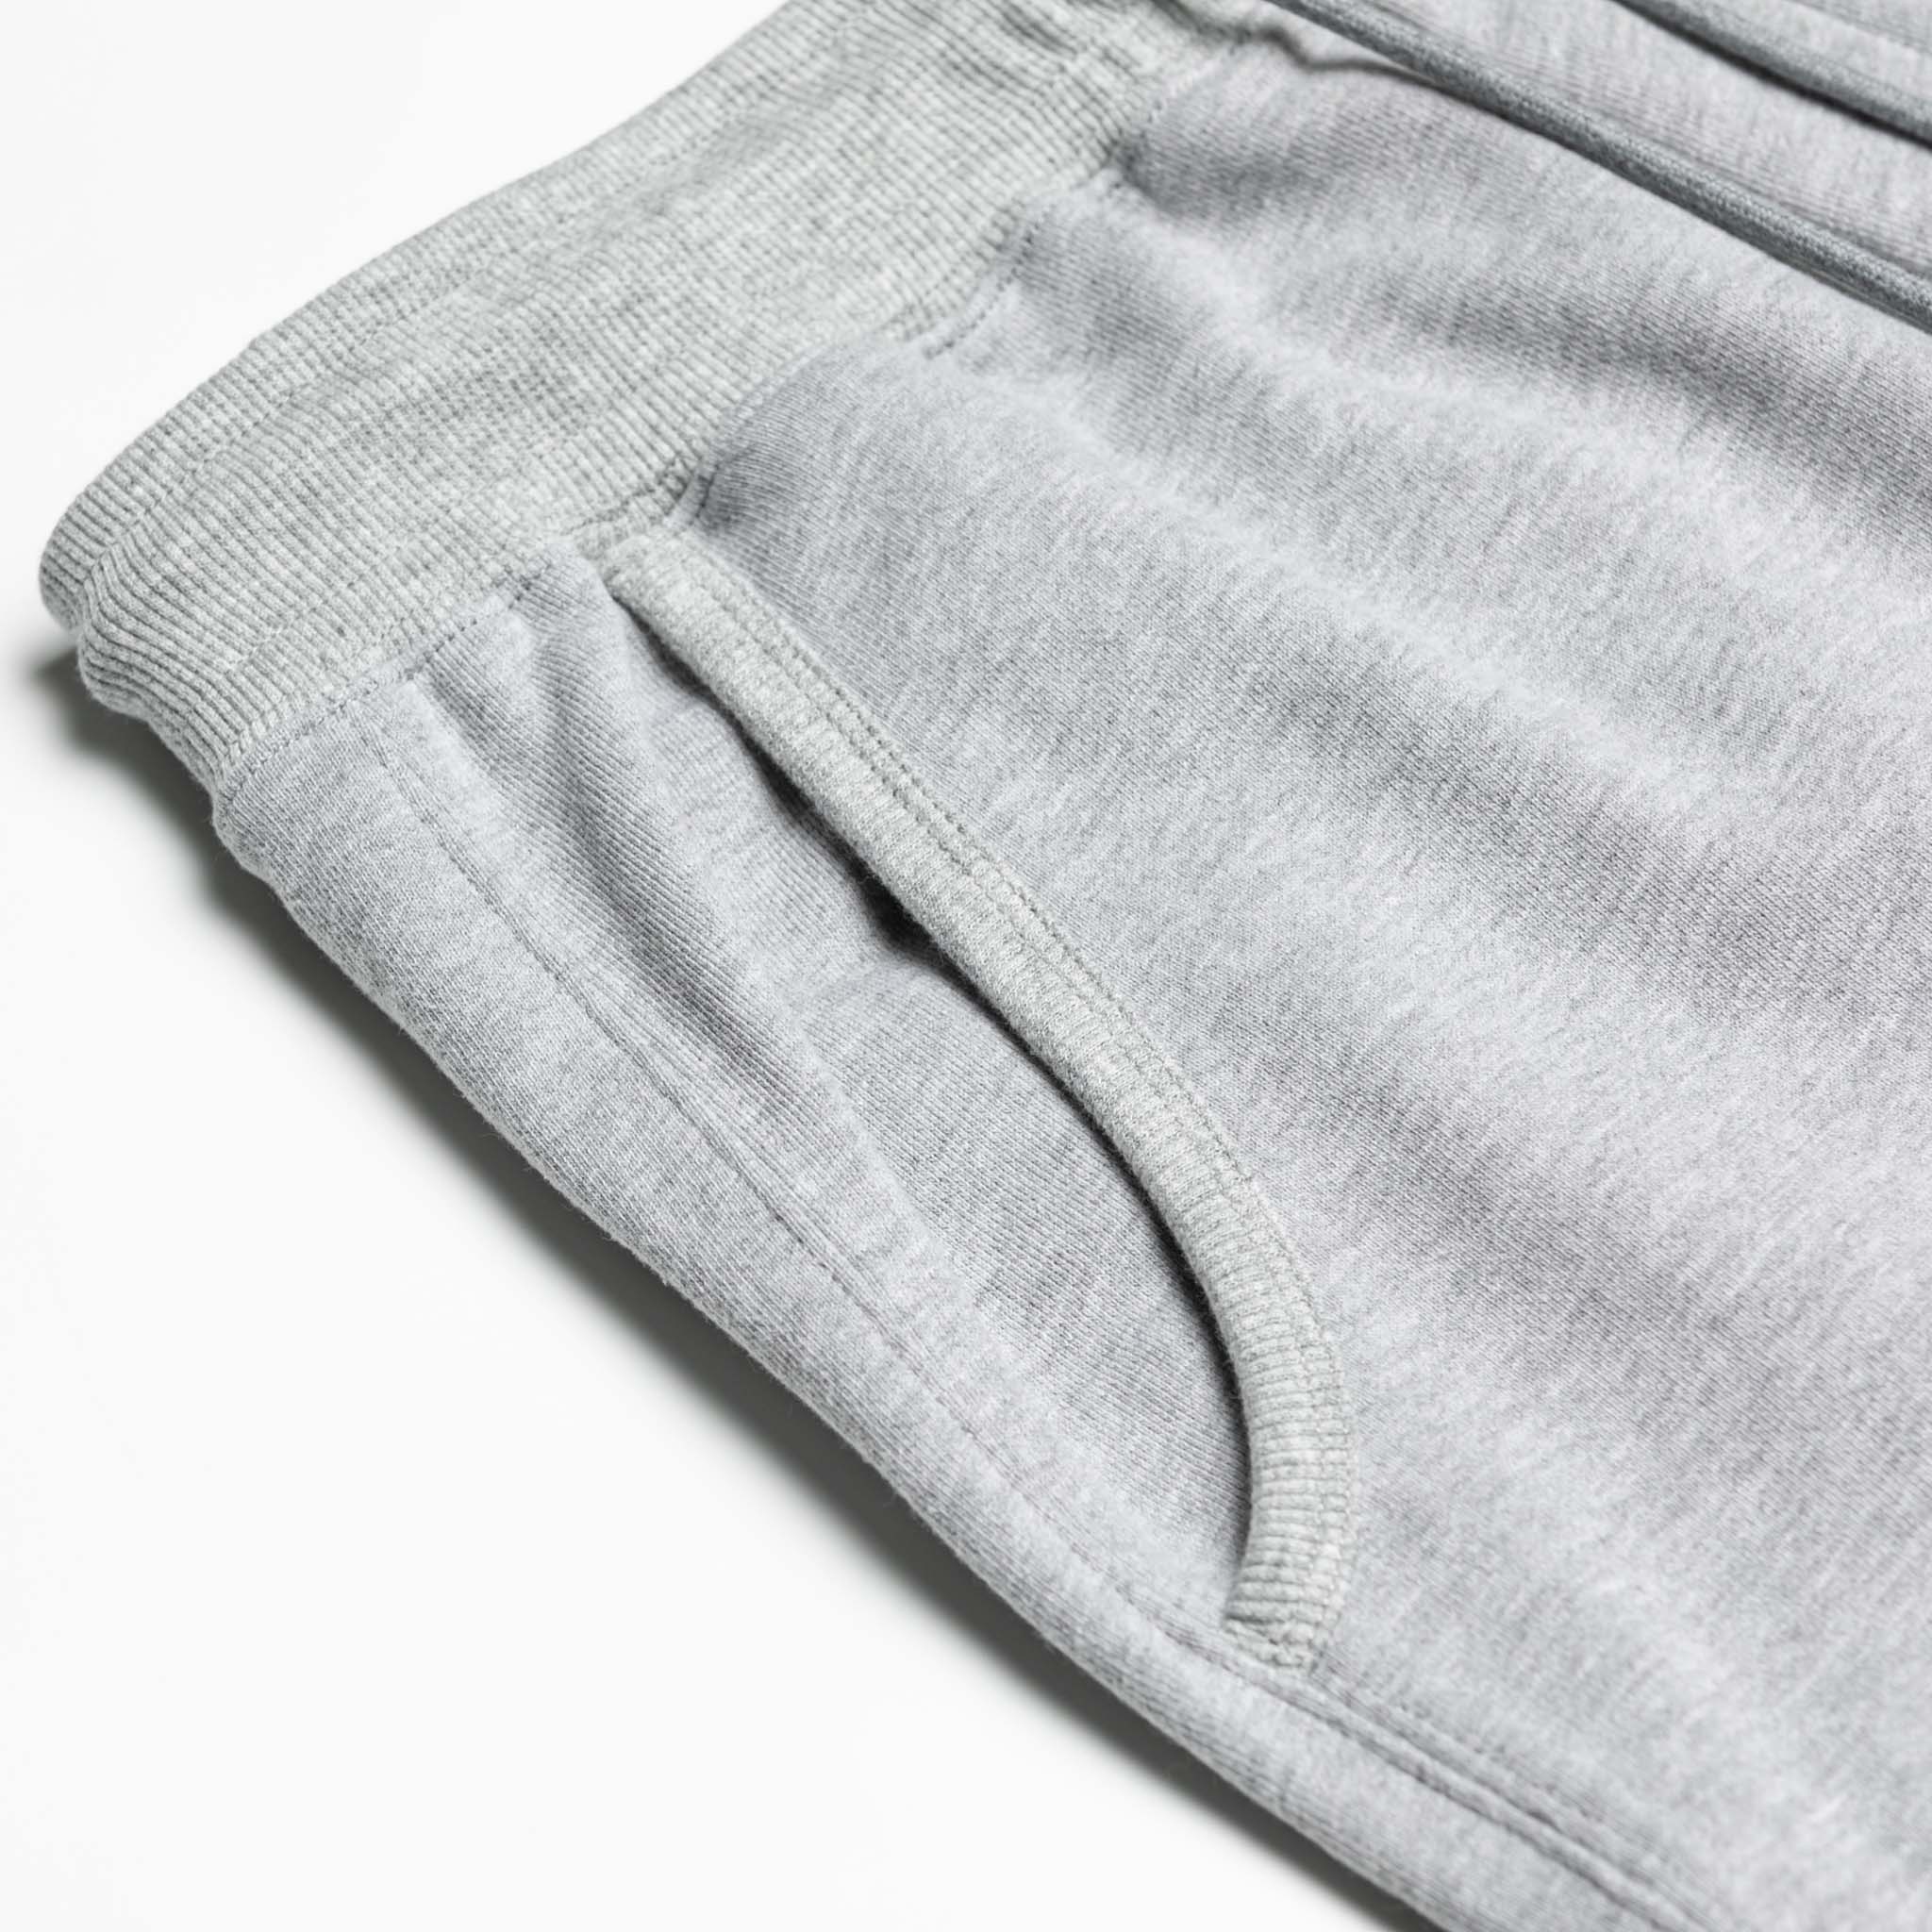 HOMME+ 'ESSENTIAL' Knit Jogger Heather Grey